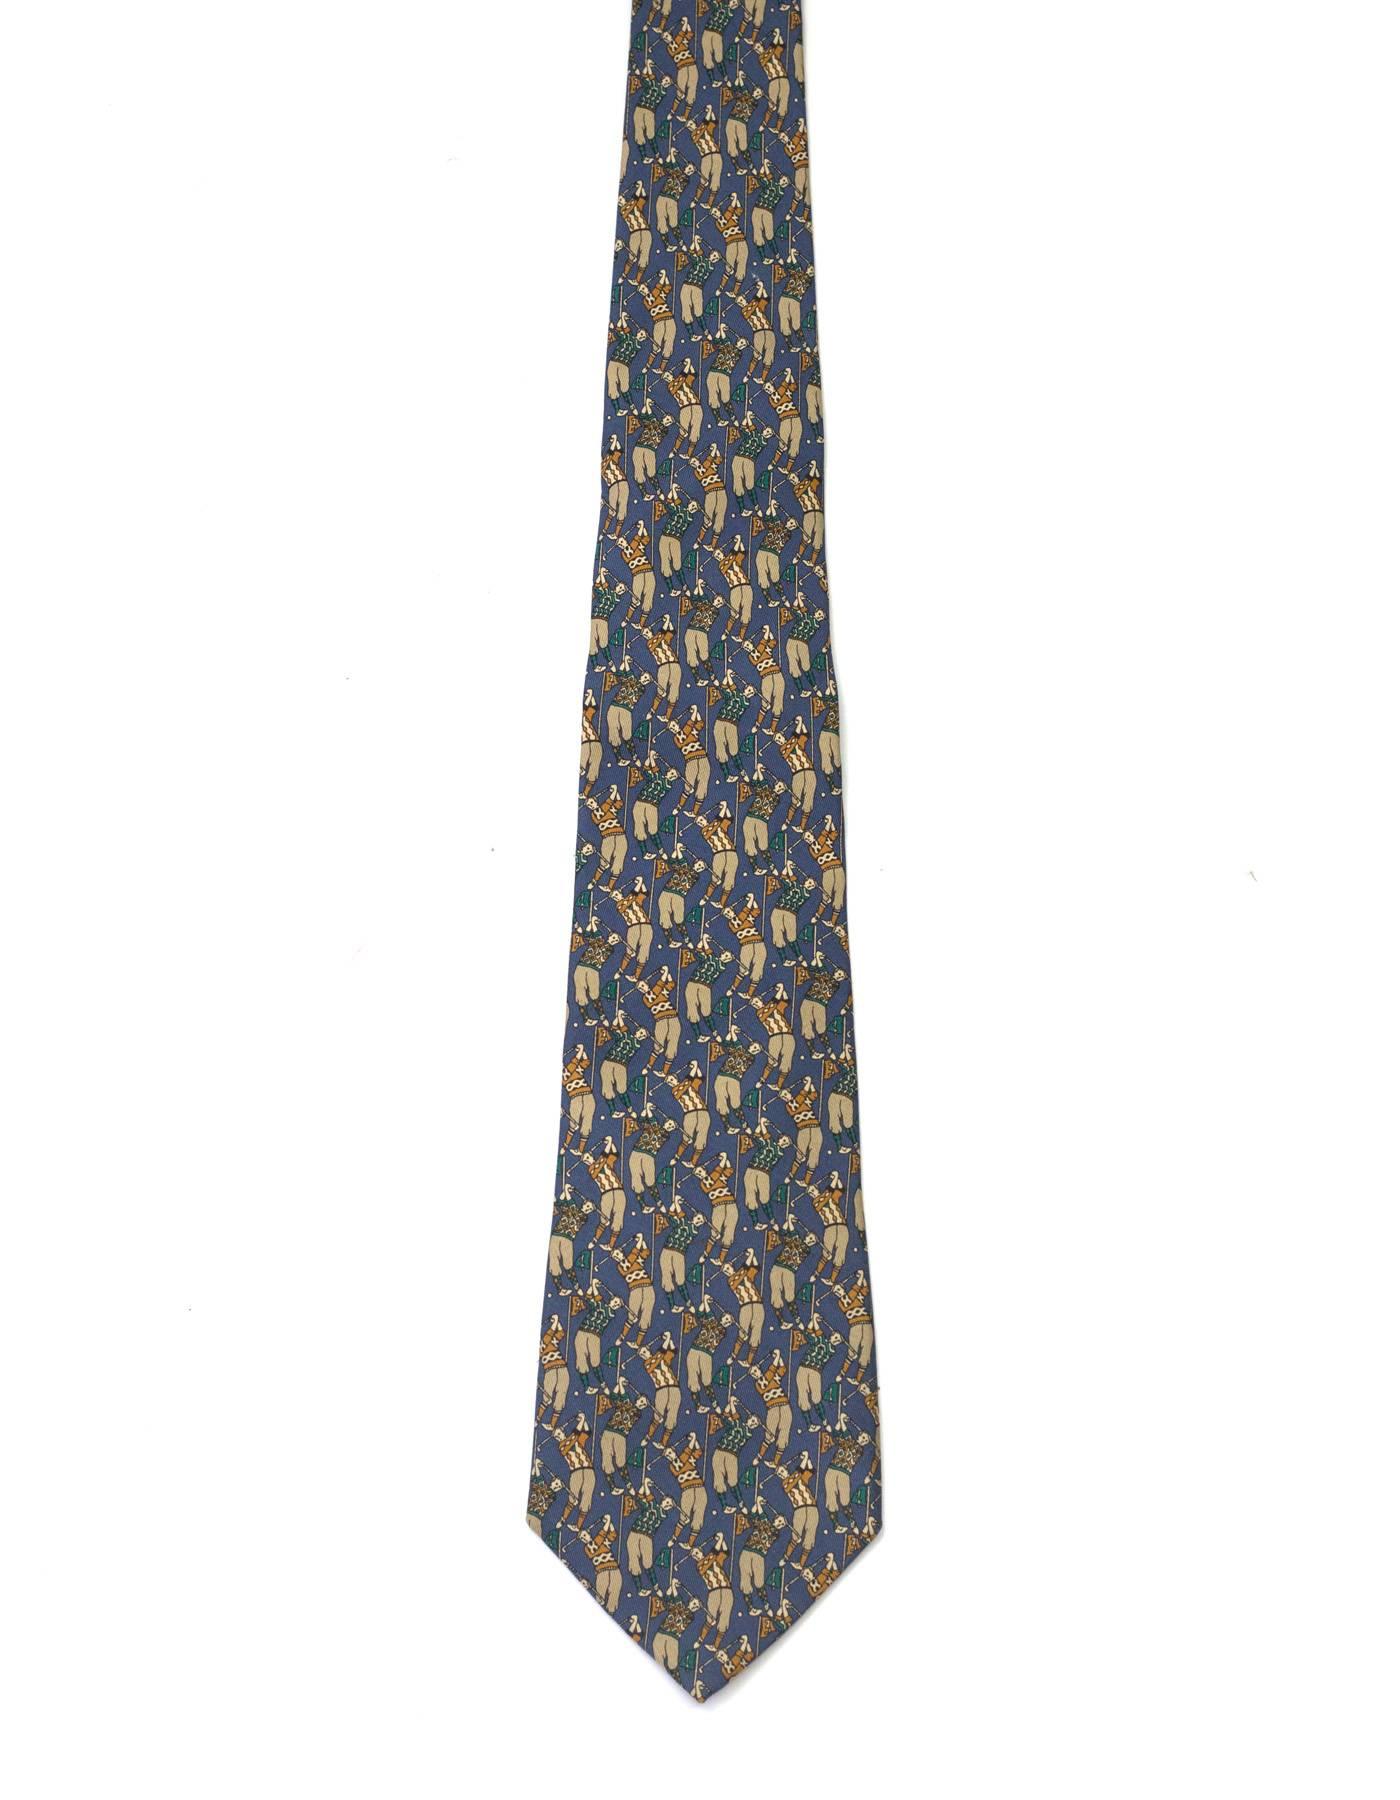 Salvatore Ferragamo Blue Golf Print Silk Tie
Features men in green and yellow argyle sweaters playing golf printed throughout

Made In: Italy
Color: Grey-blue, green,yellow and taupe
Composition: 100% silk
Overall Condition: Excellent pre-owned